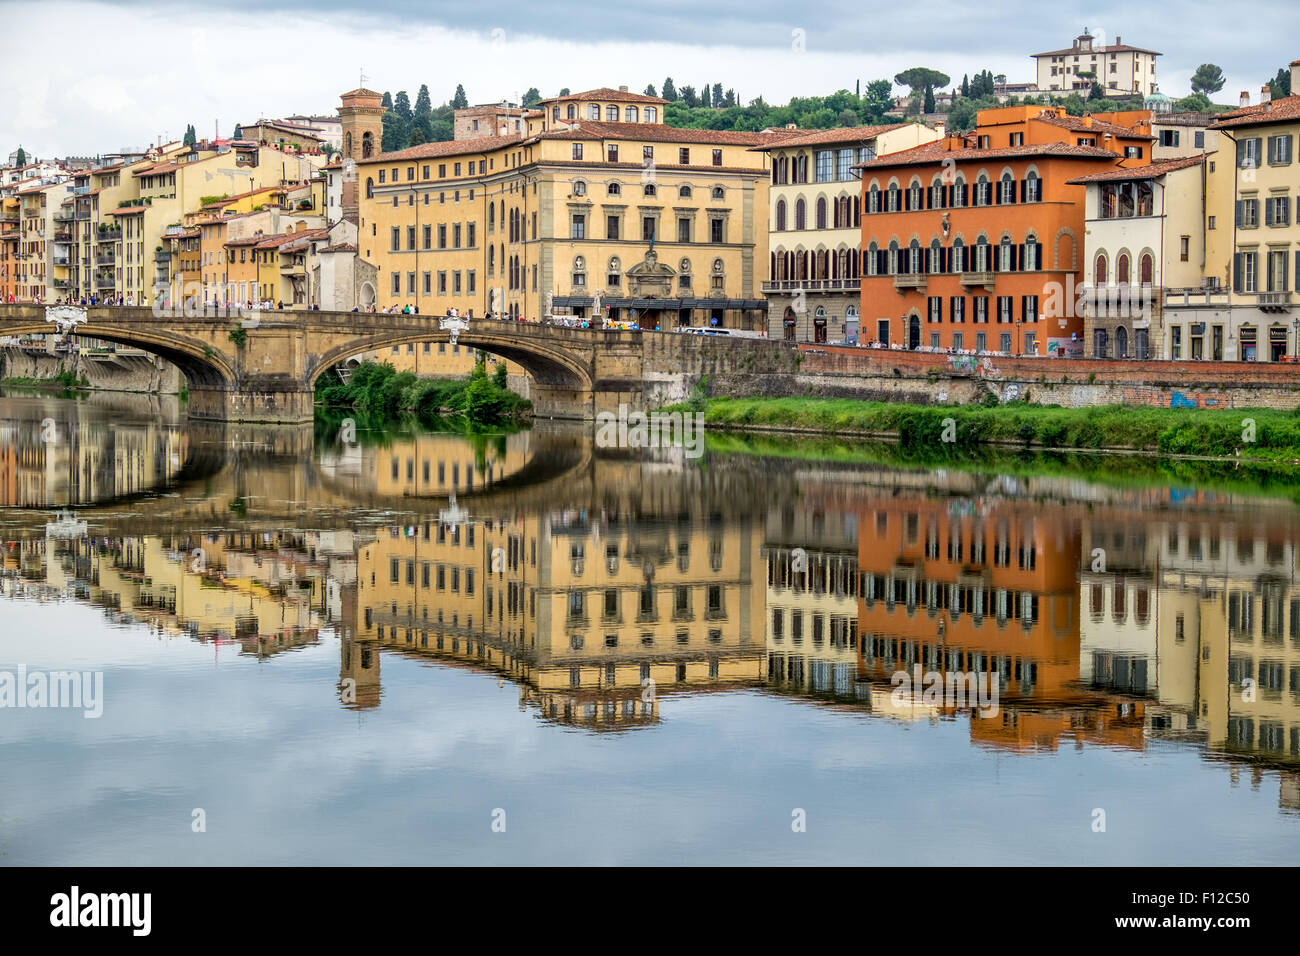 Riverside view along the river Arno looking towards Ponte Vecchio, florence Italy Stock Photo